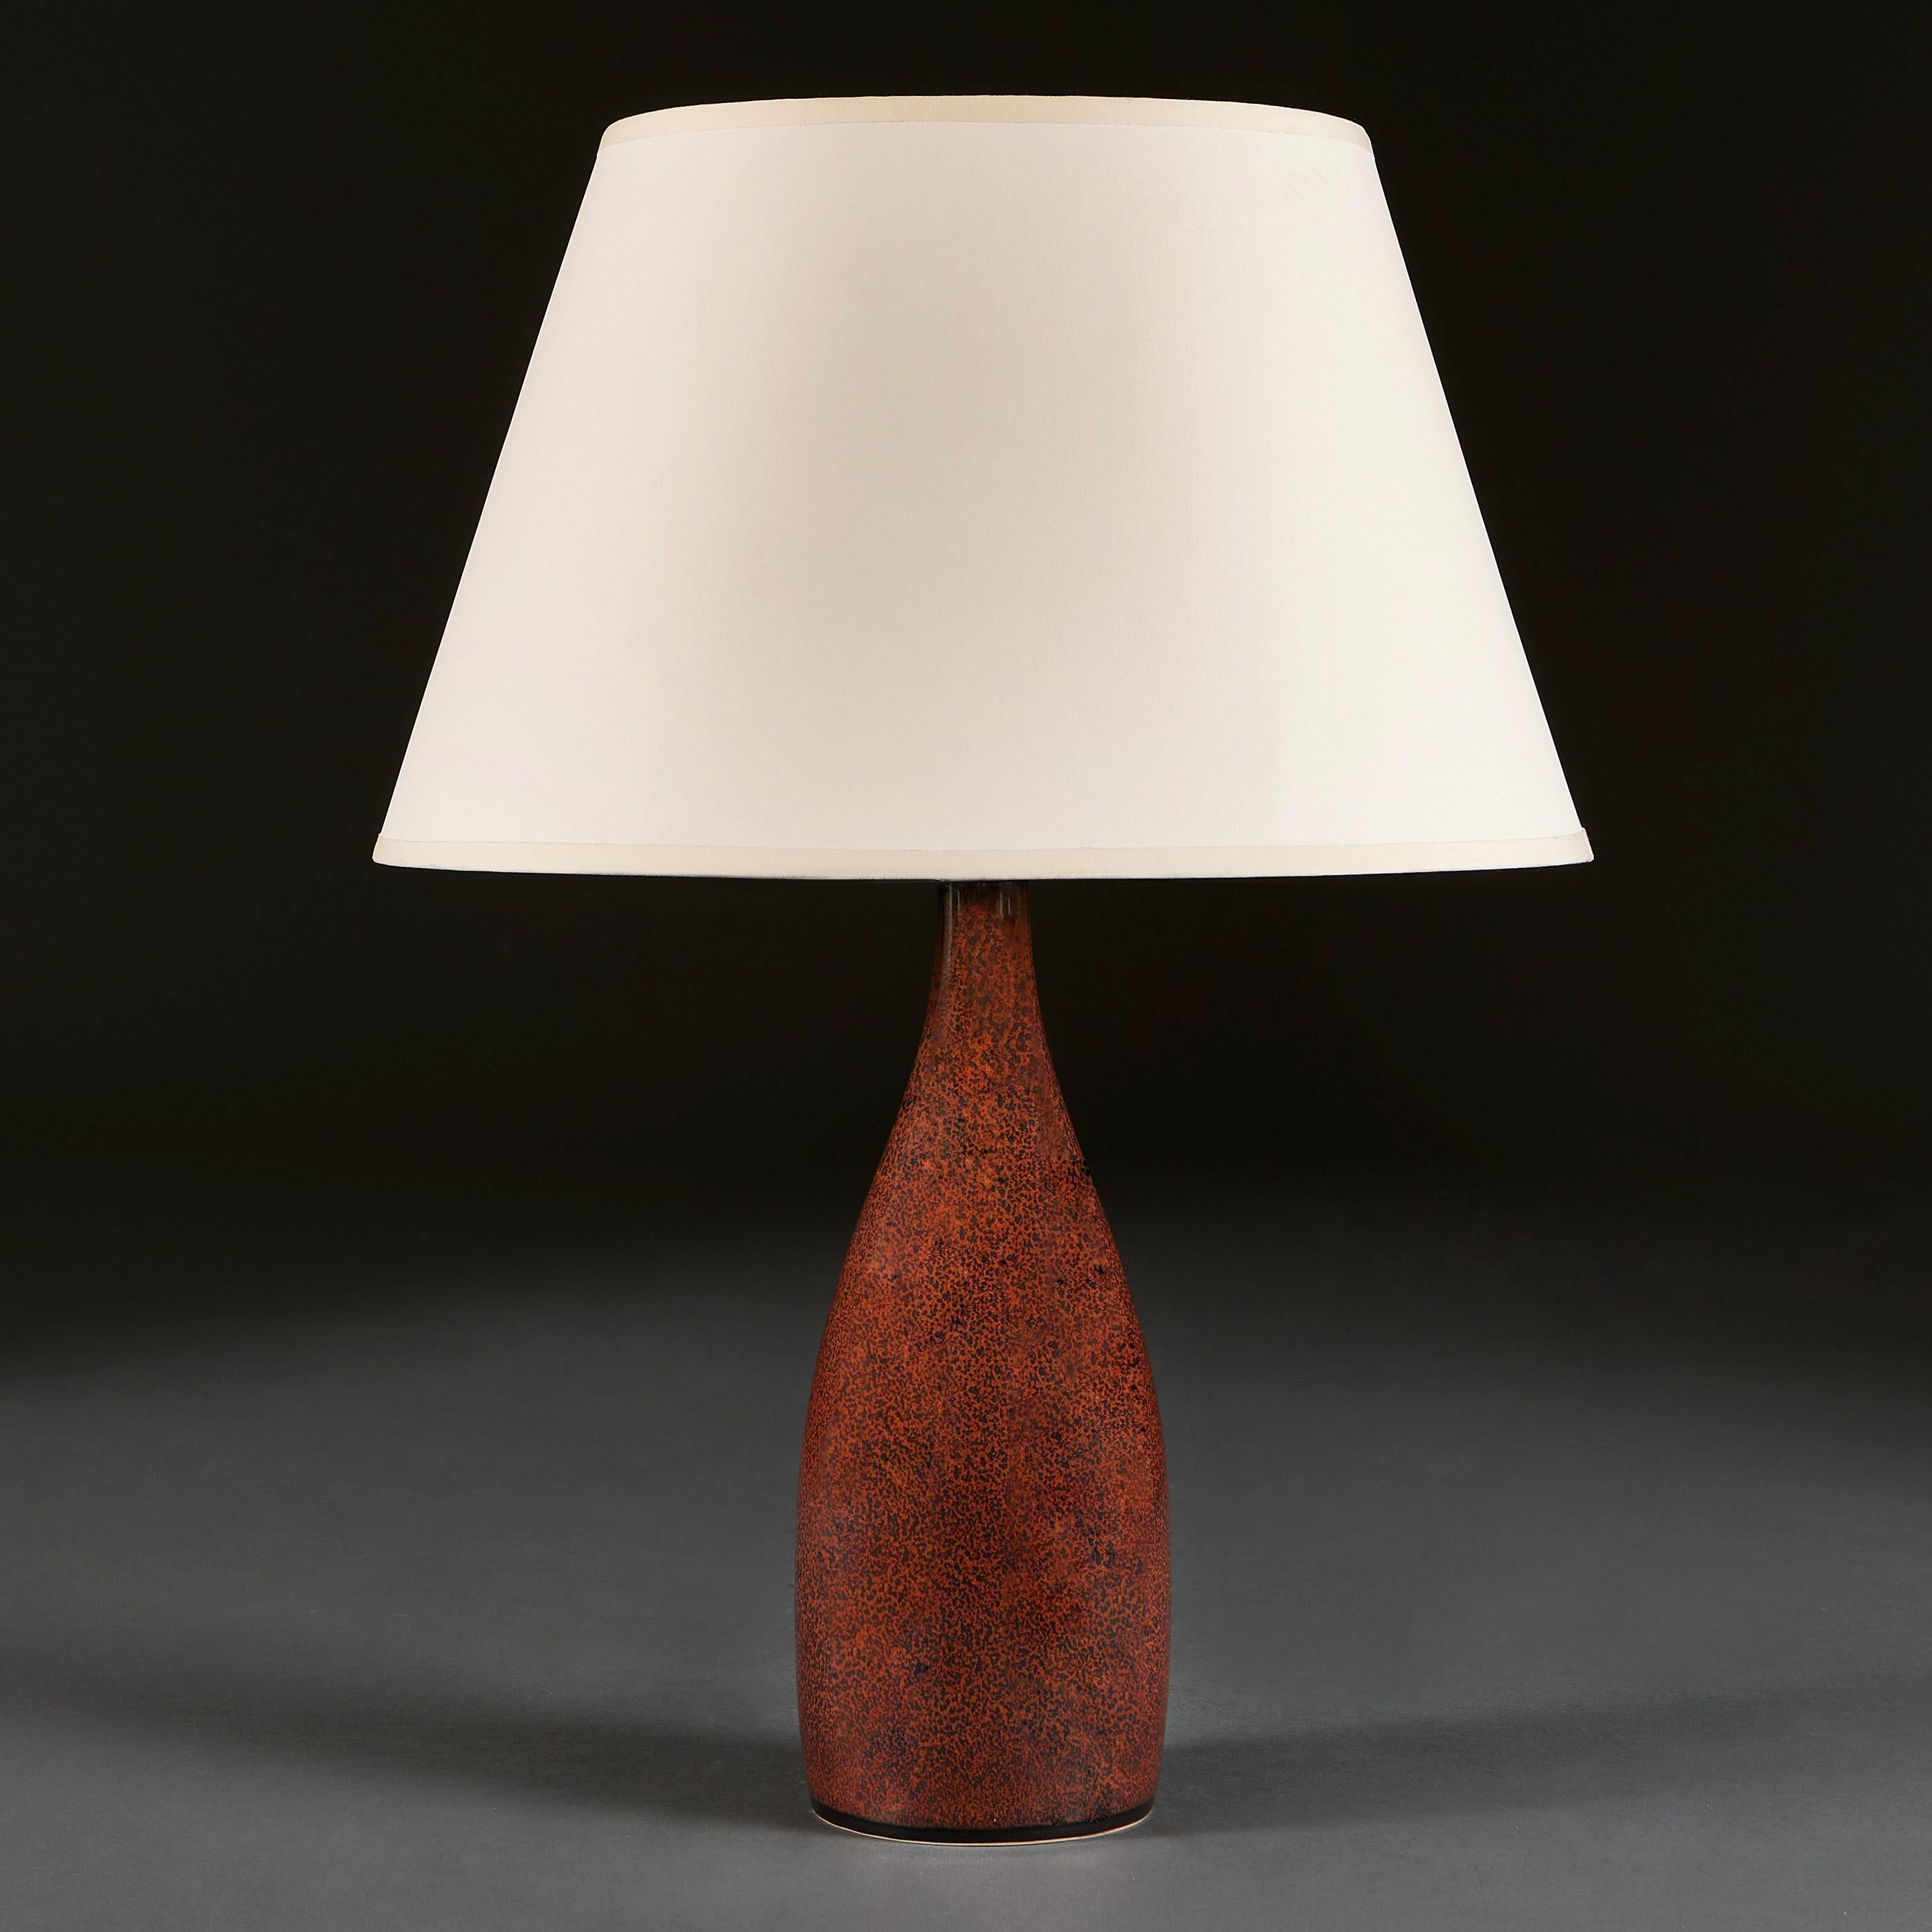 England, circa 20th century 

A red ironspot vase with bottle neck, thrown from white stoneware, now converted as a lamp.

Height 32.00cm
Diameter 12.50cm

Please note: This is currently wired for the UK with BC bulb fitting, twisted bronze